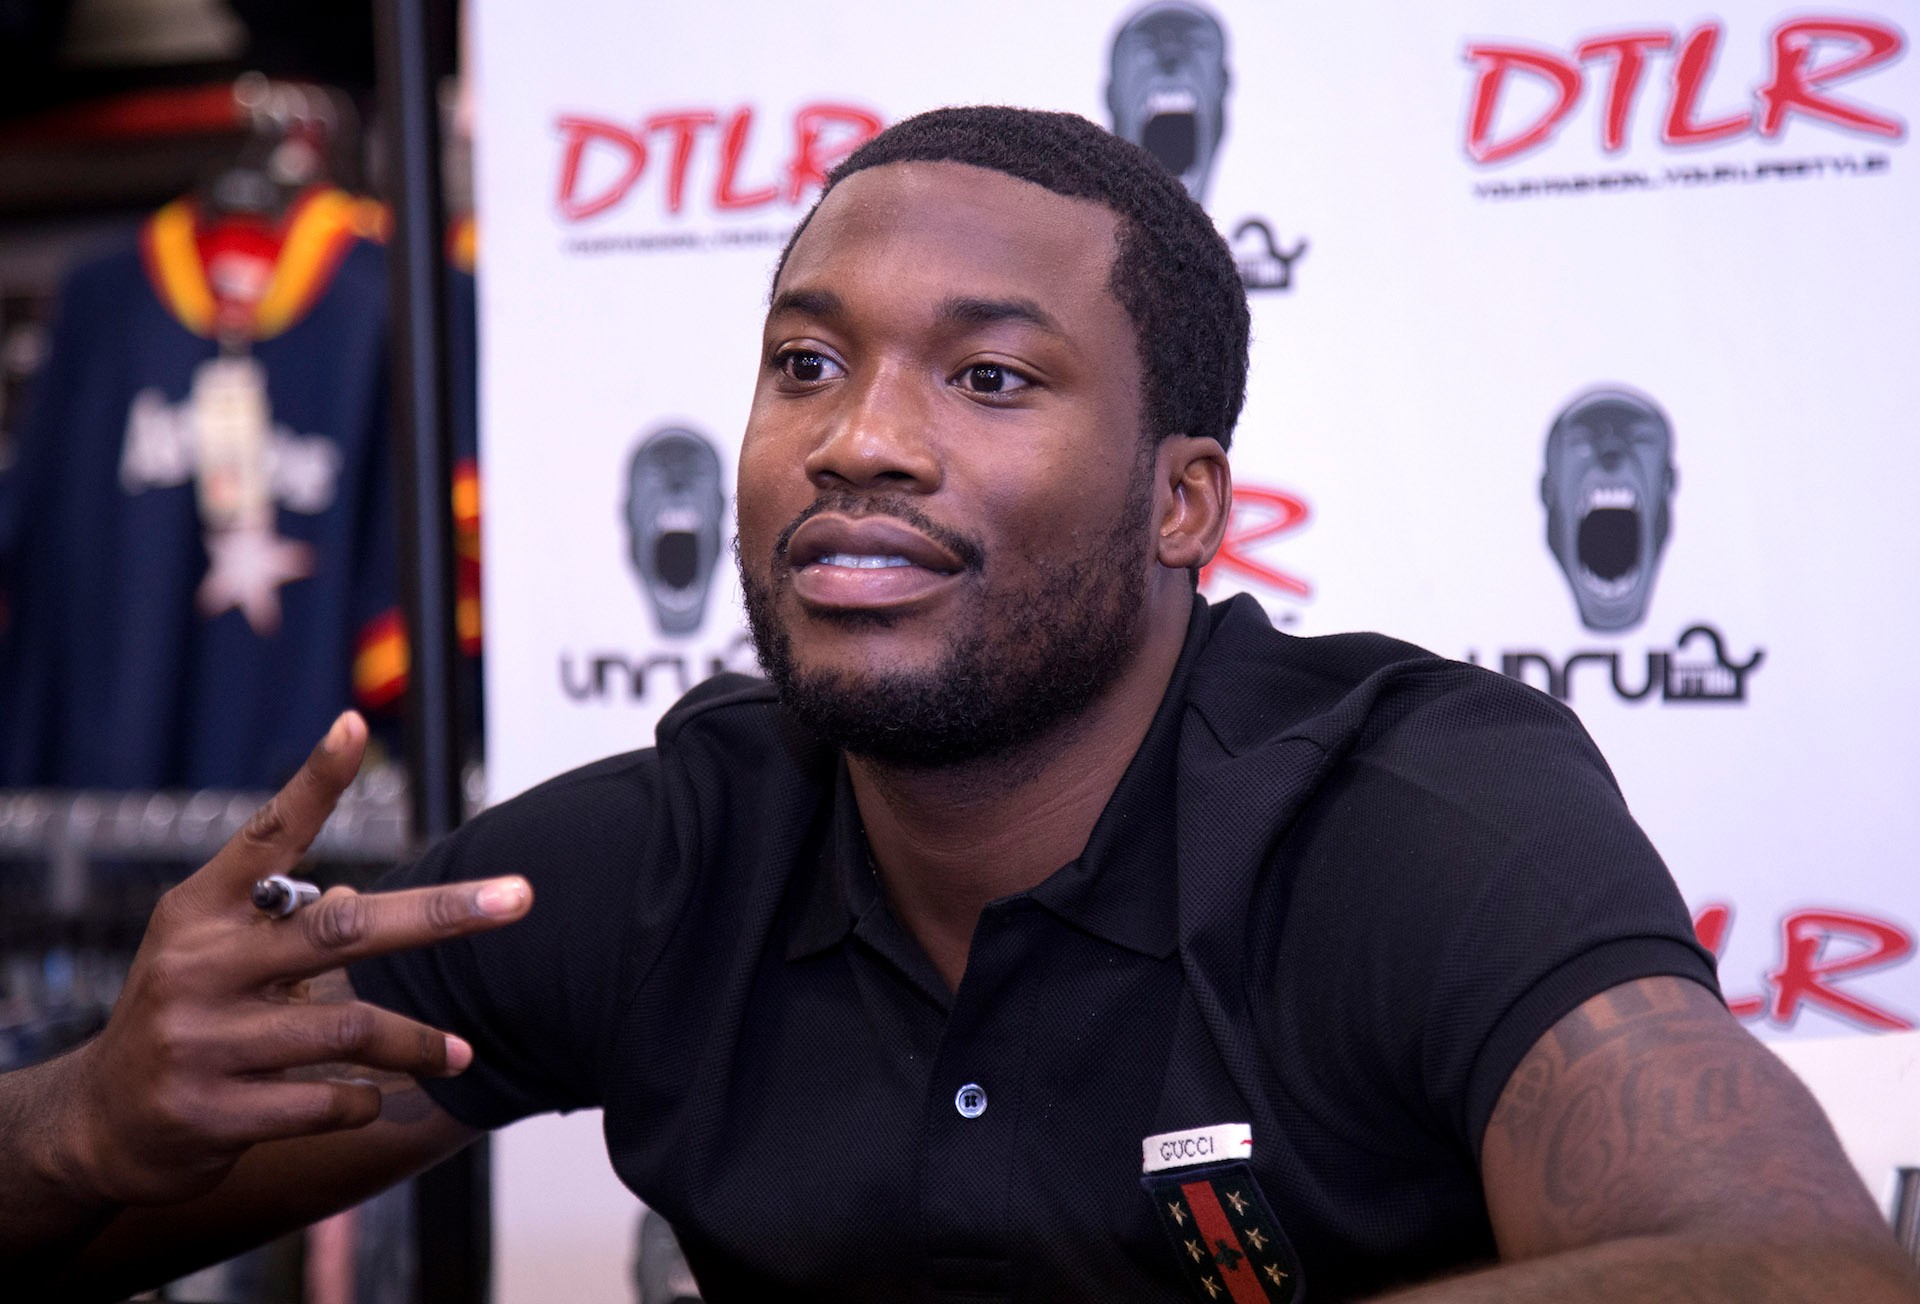 Meek Mill might be getting a new trial – VICE News